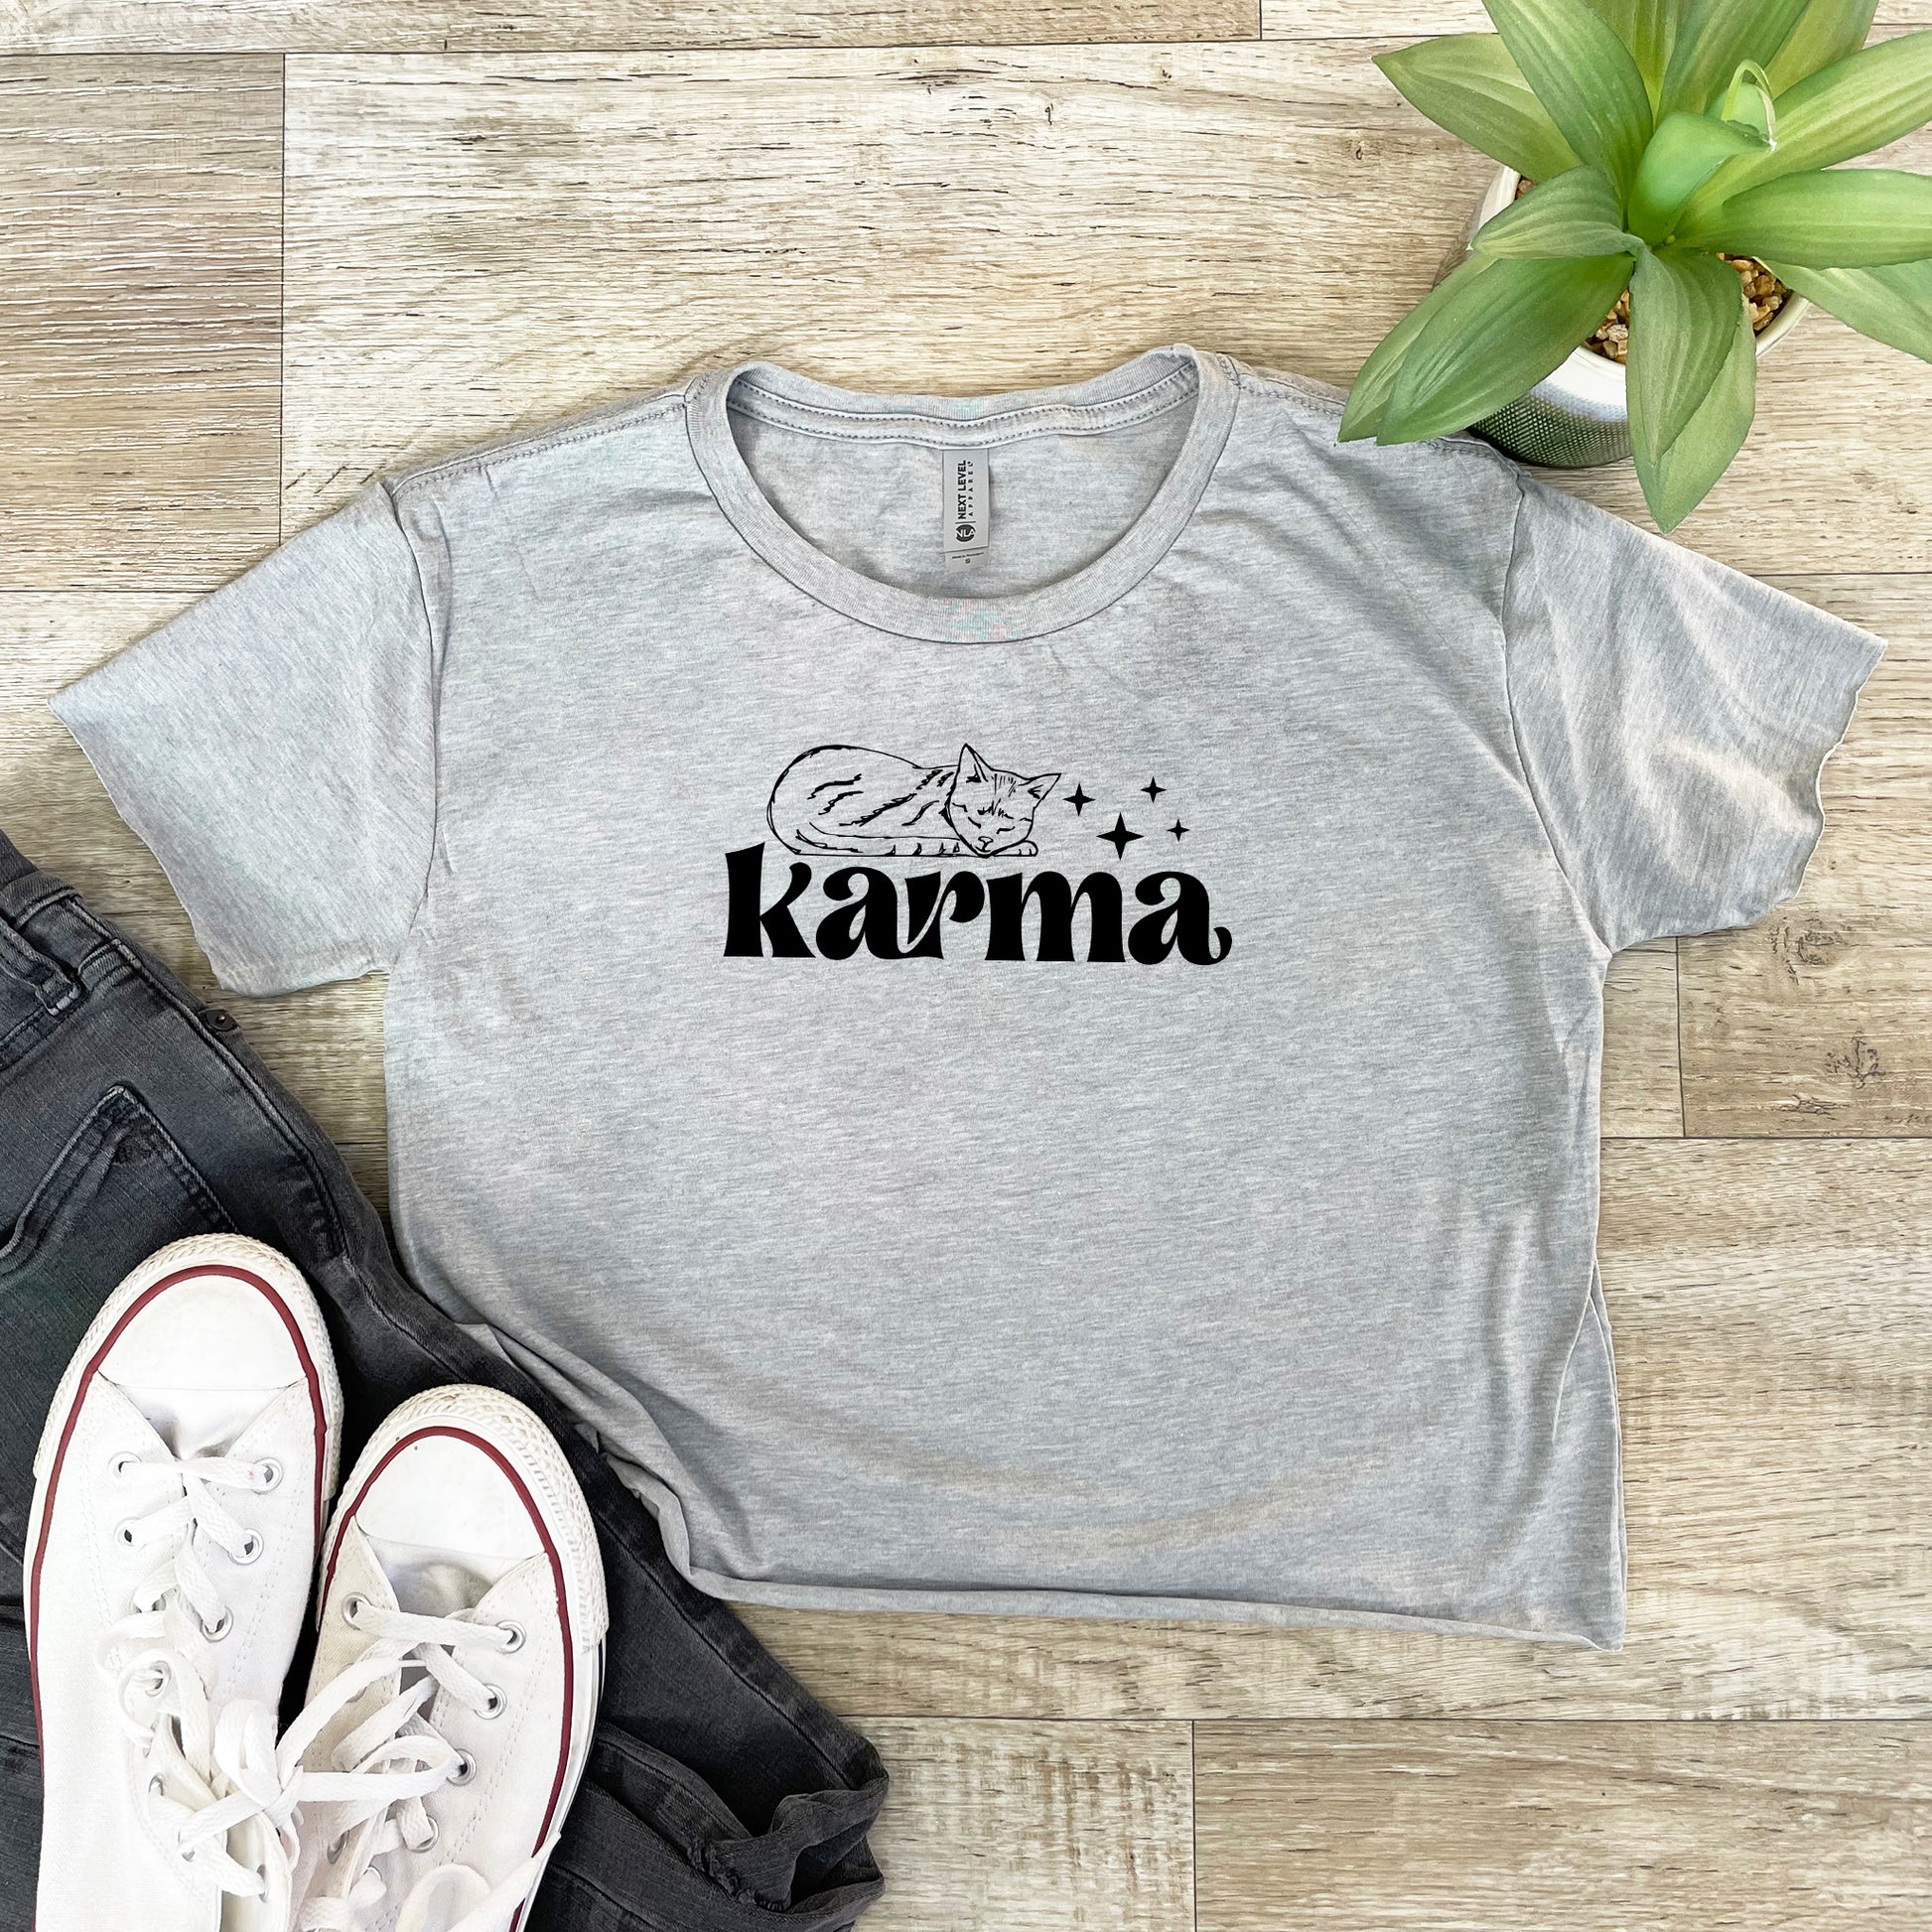 a t - shirt with the word karma printed on it next to a pair of